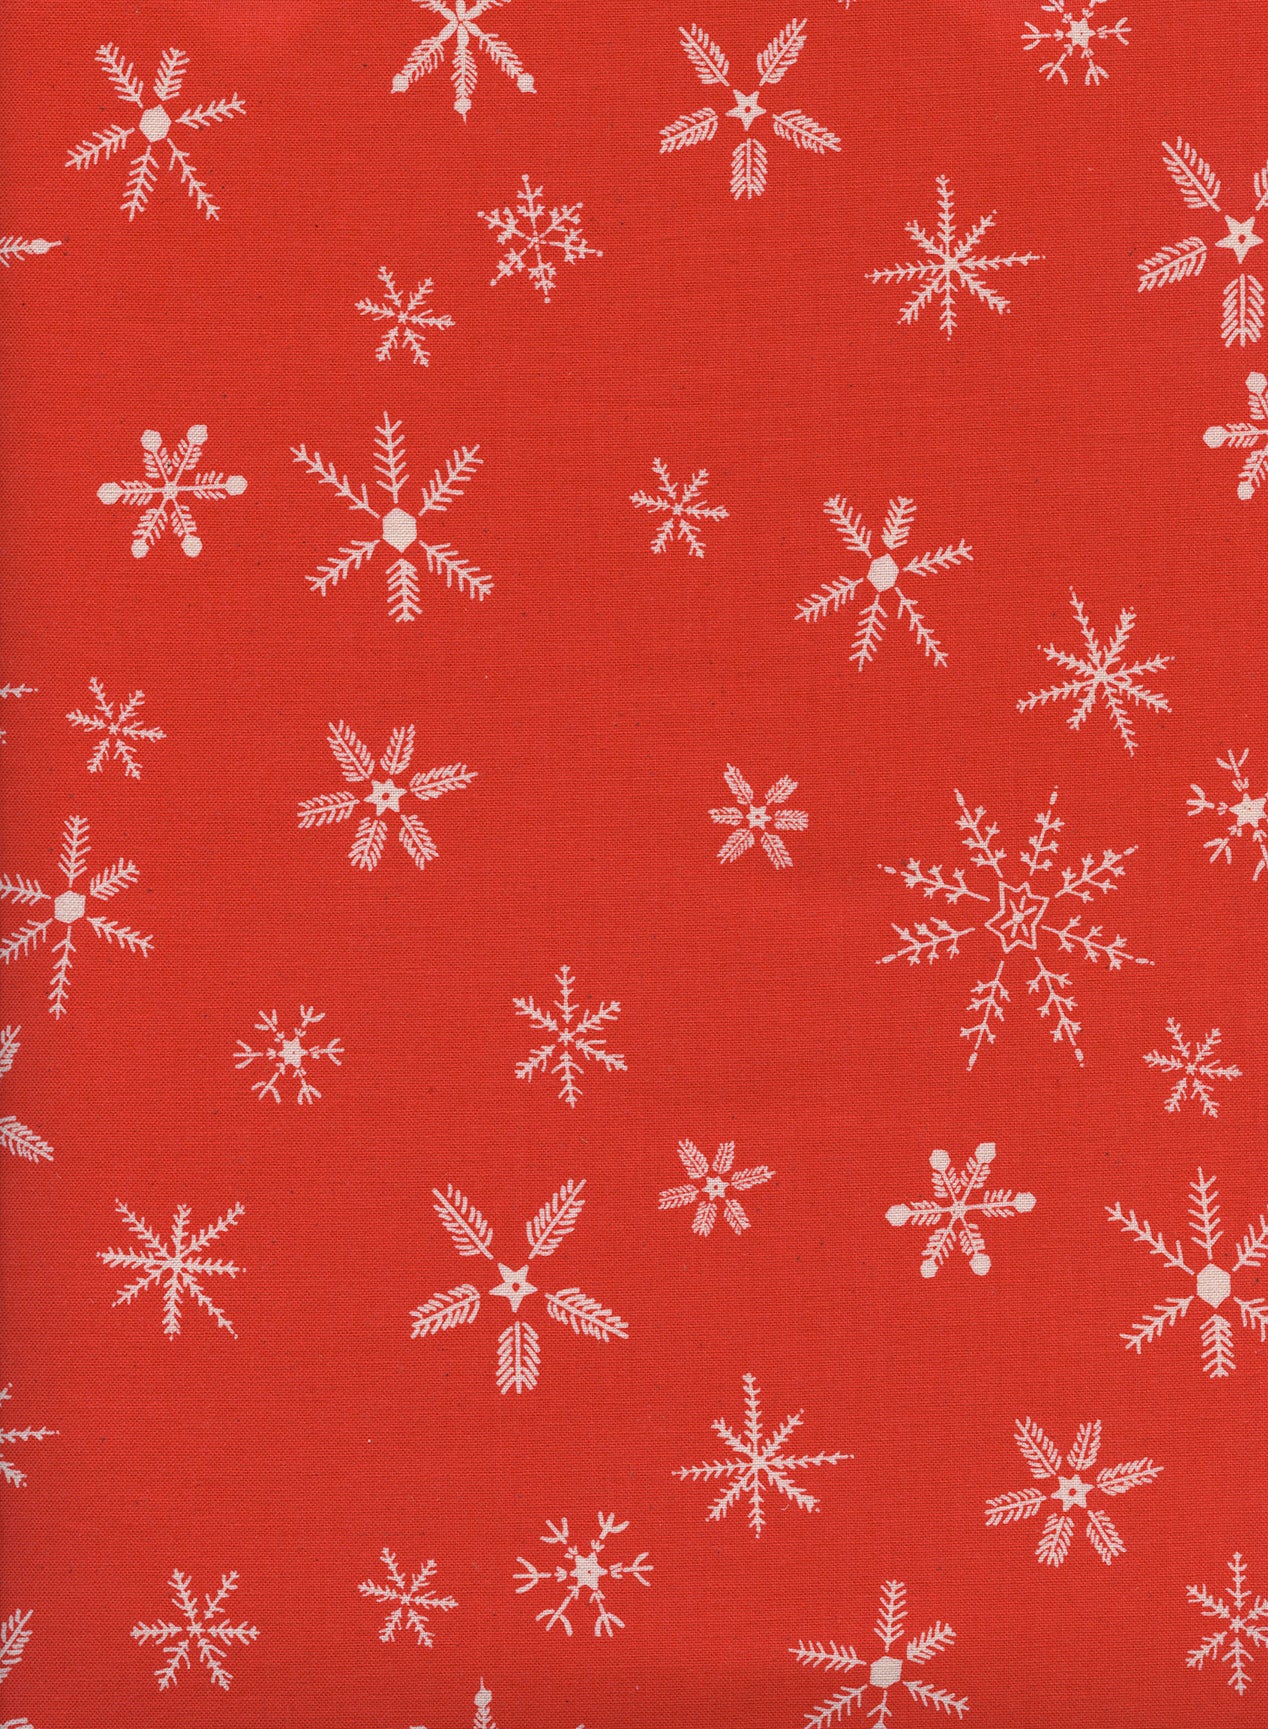 C+S Frost - Flurry - Red Unbleached Cotton Fabric